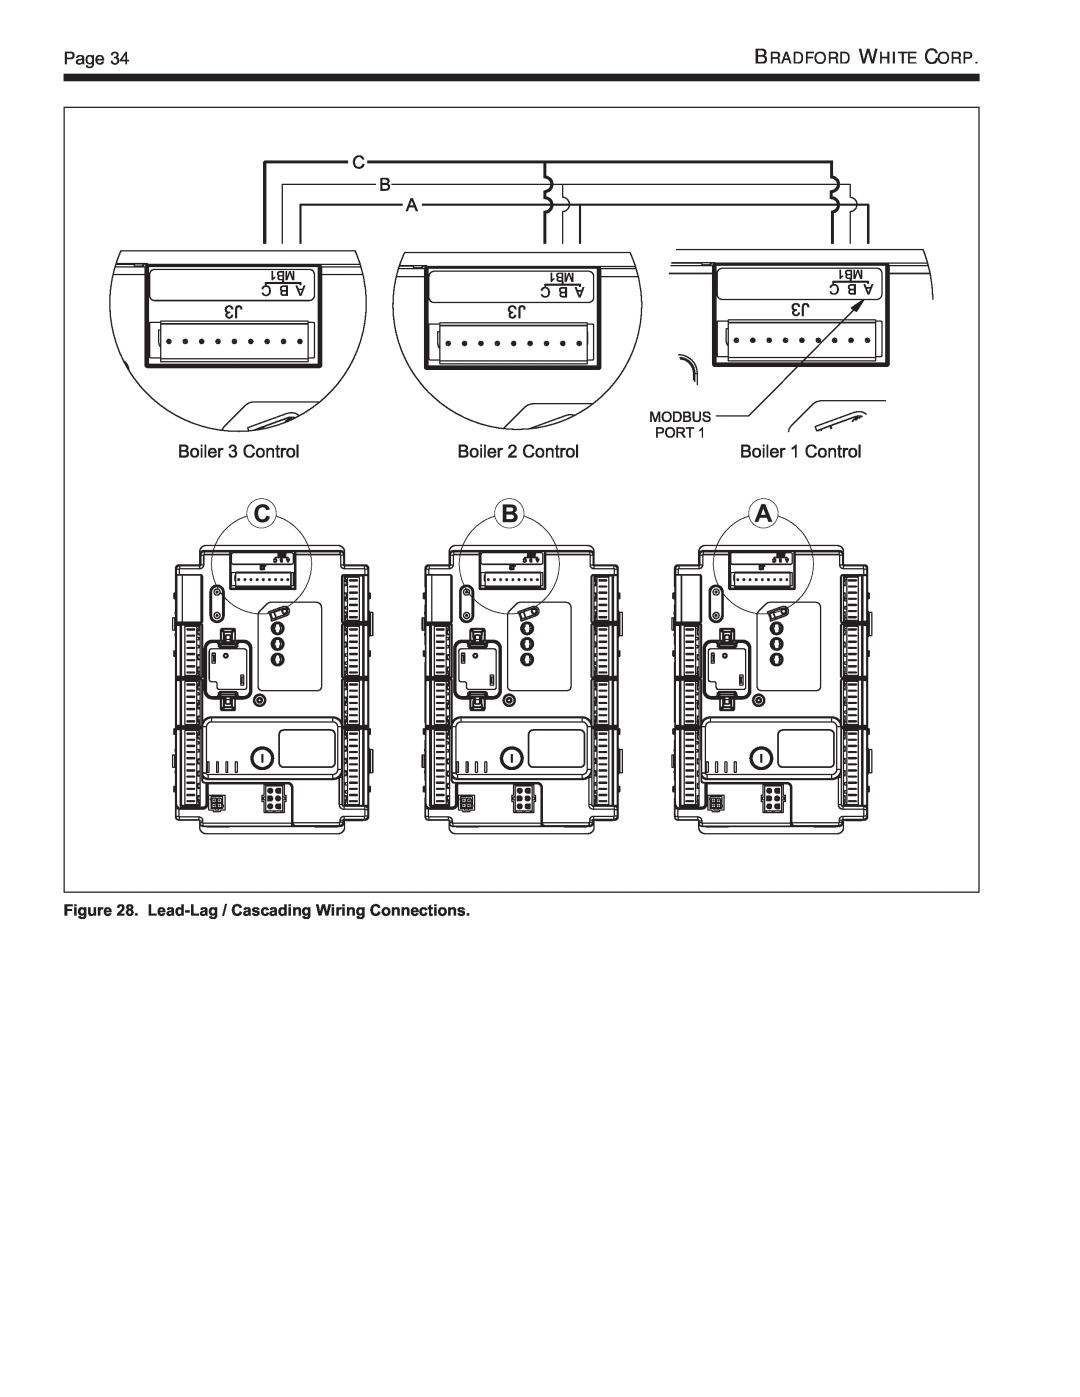 Bradford-White Corp BNTV, BNTH, Modulating Boiler warranty Page, Lead-Lag / Cascading Wiring Connections 